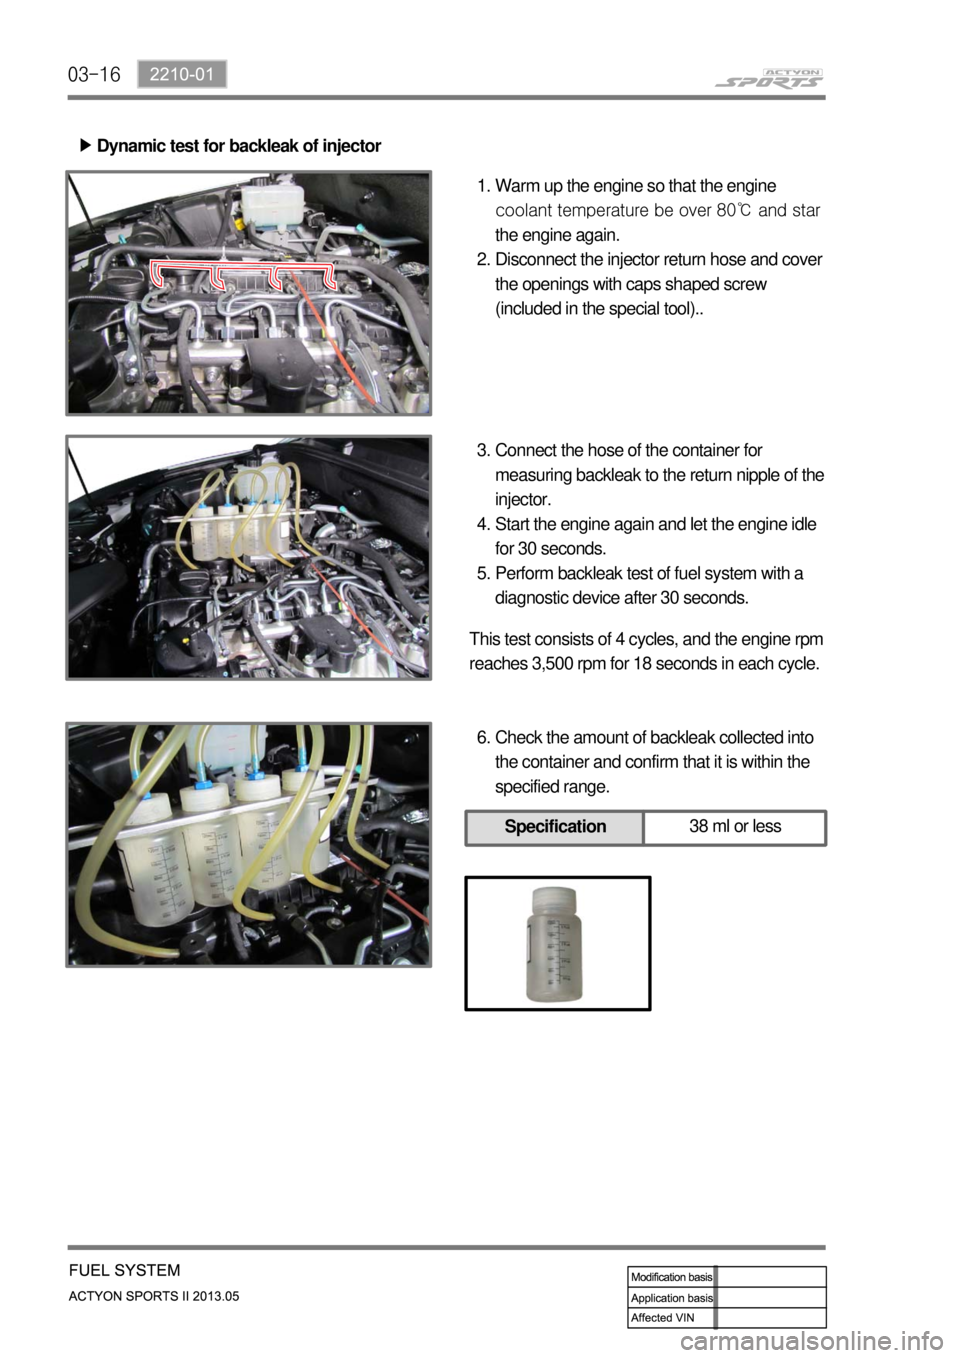 SSANGYONG NEW ACTYON SPORTS 2013  Service Manual 03-16
Dynamic test for backleak of injector ▶
Warm up the engine so that the engine 
coolant temperature be over 80℃ and star 
the engine again.
Disconnect the injector return hose and cover 
the 